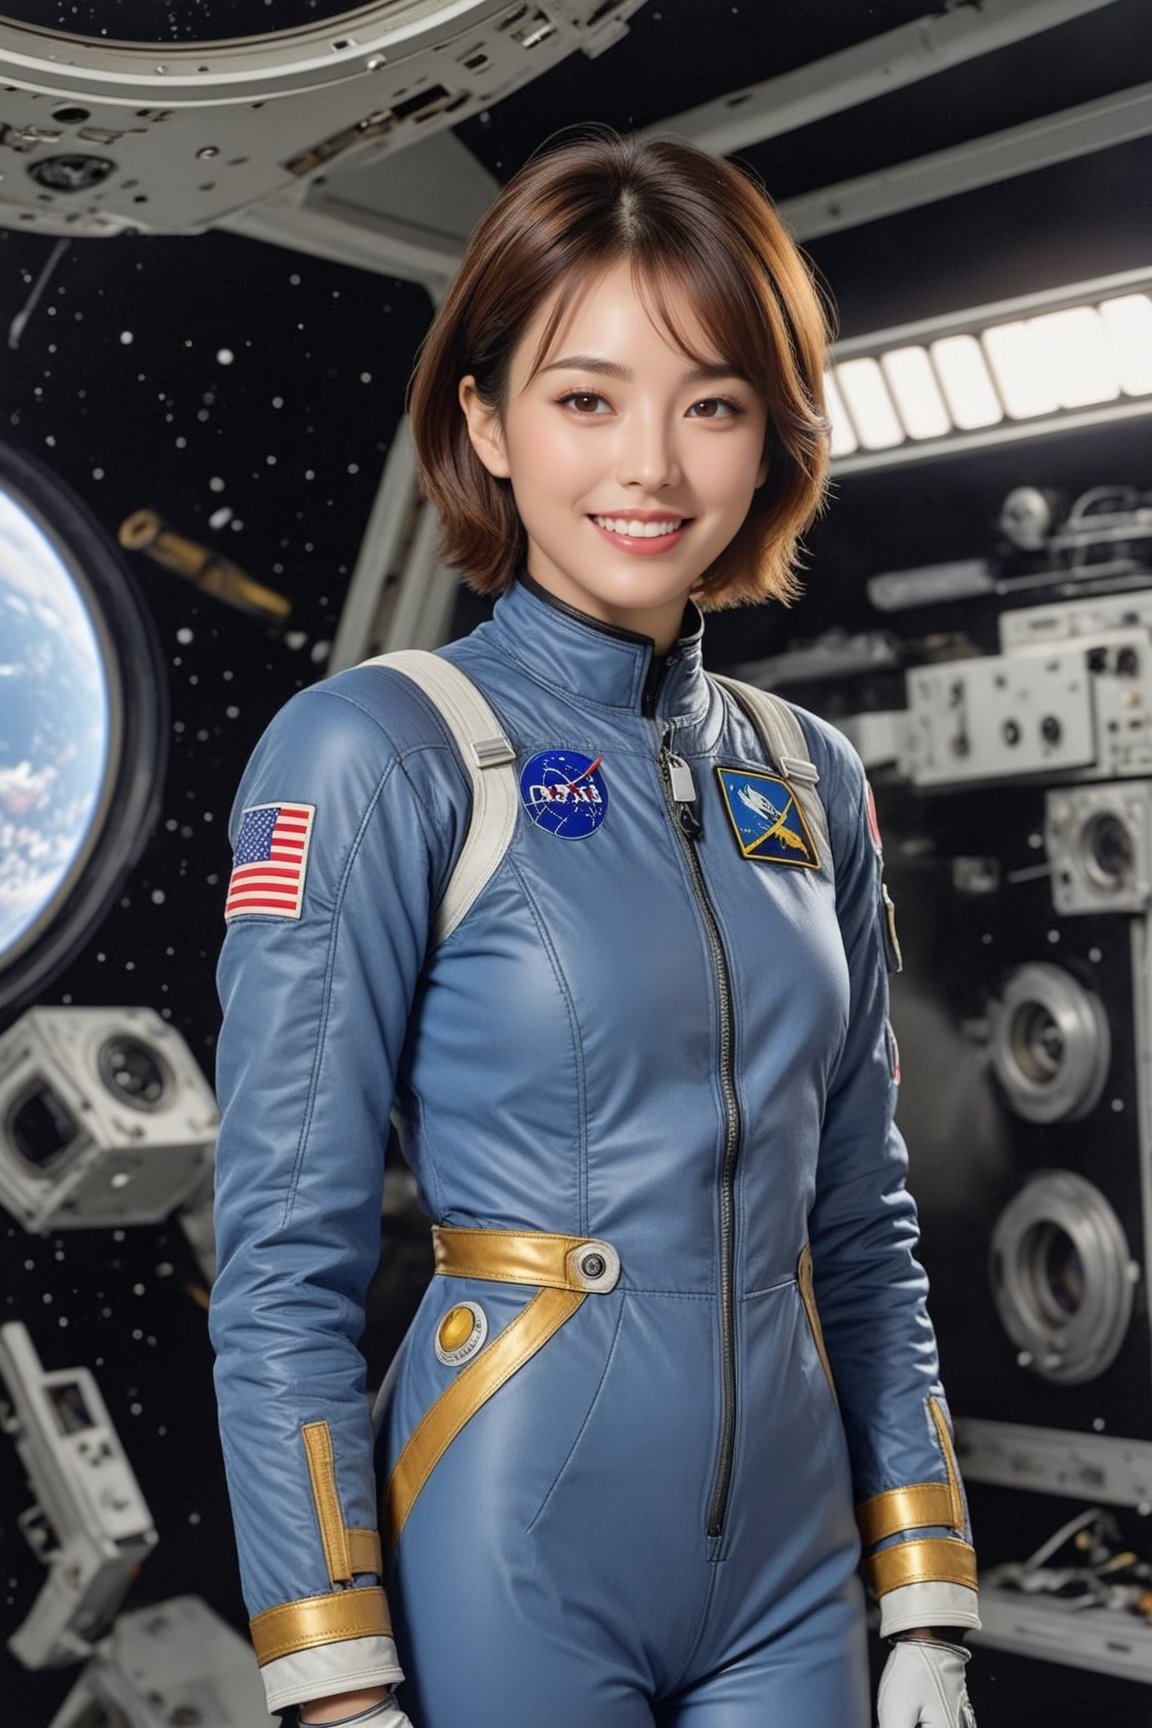 Hyper-Realistic photo of a beautiful girl,20yo,1girl,perfect female form,perfect body proportion,perfect anatomy,space suit,detailed exquisite face,soft shiny skin,smile,mesmerizing,short hair
BREAK
(backdrop of space station,indoors,windows,dark space),(fullbody:1.2),[[cluttered maximalism]]
BREAK
(rule of thirds:1.3),perfect composition,studio photo,trending on artstation,(Masterpiece,Best quality,32k,UHD:1.5),(sharp focus,high contrast,HDR,hyper-detailed,intricate details,ultra-realistic,award-winning photo,ultra-clear,kodachrome vintage:1.3),(chiaroscuro lighting,soft rim lighting:1.2),by Karol Bak,Gustav Klimt and Hayao Miyazaki, photo_b00ster,real_booster, art_booster,han-hyoju-xl